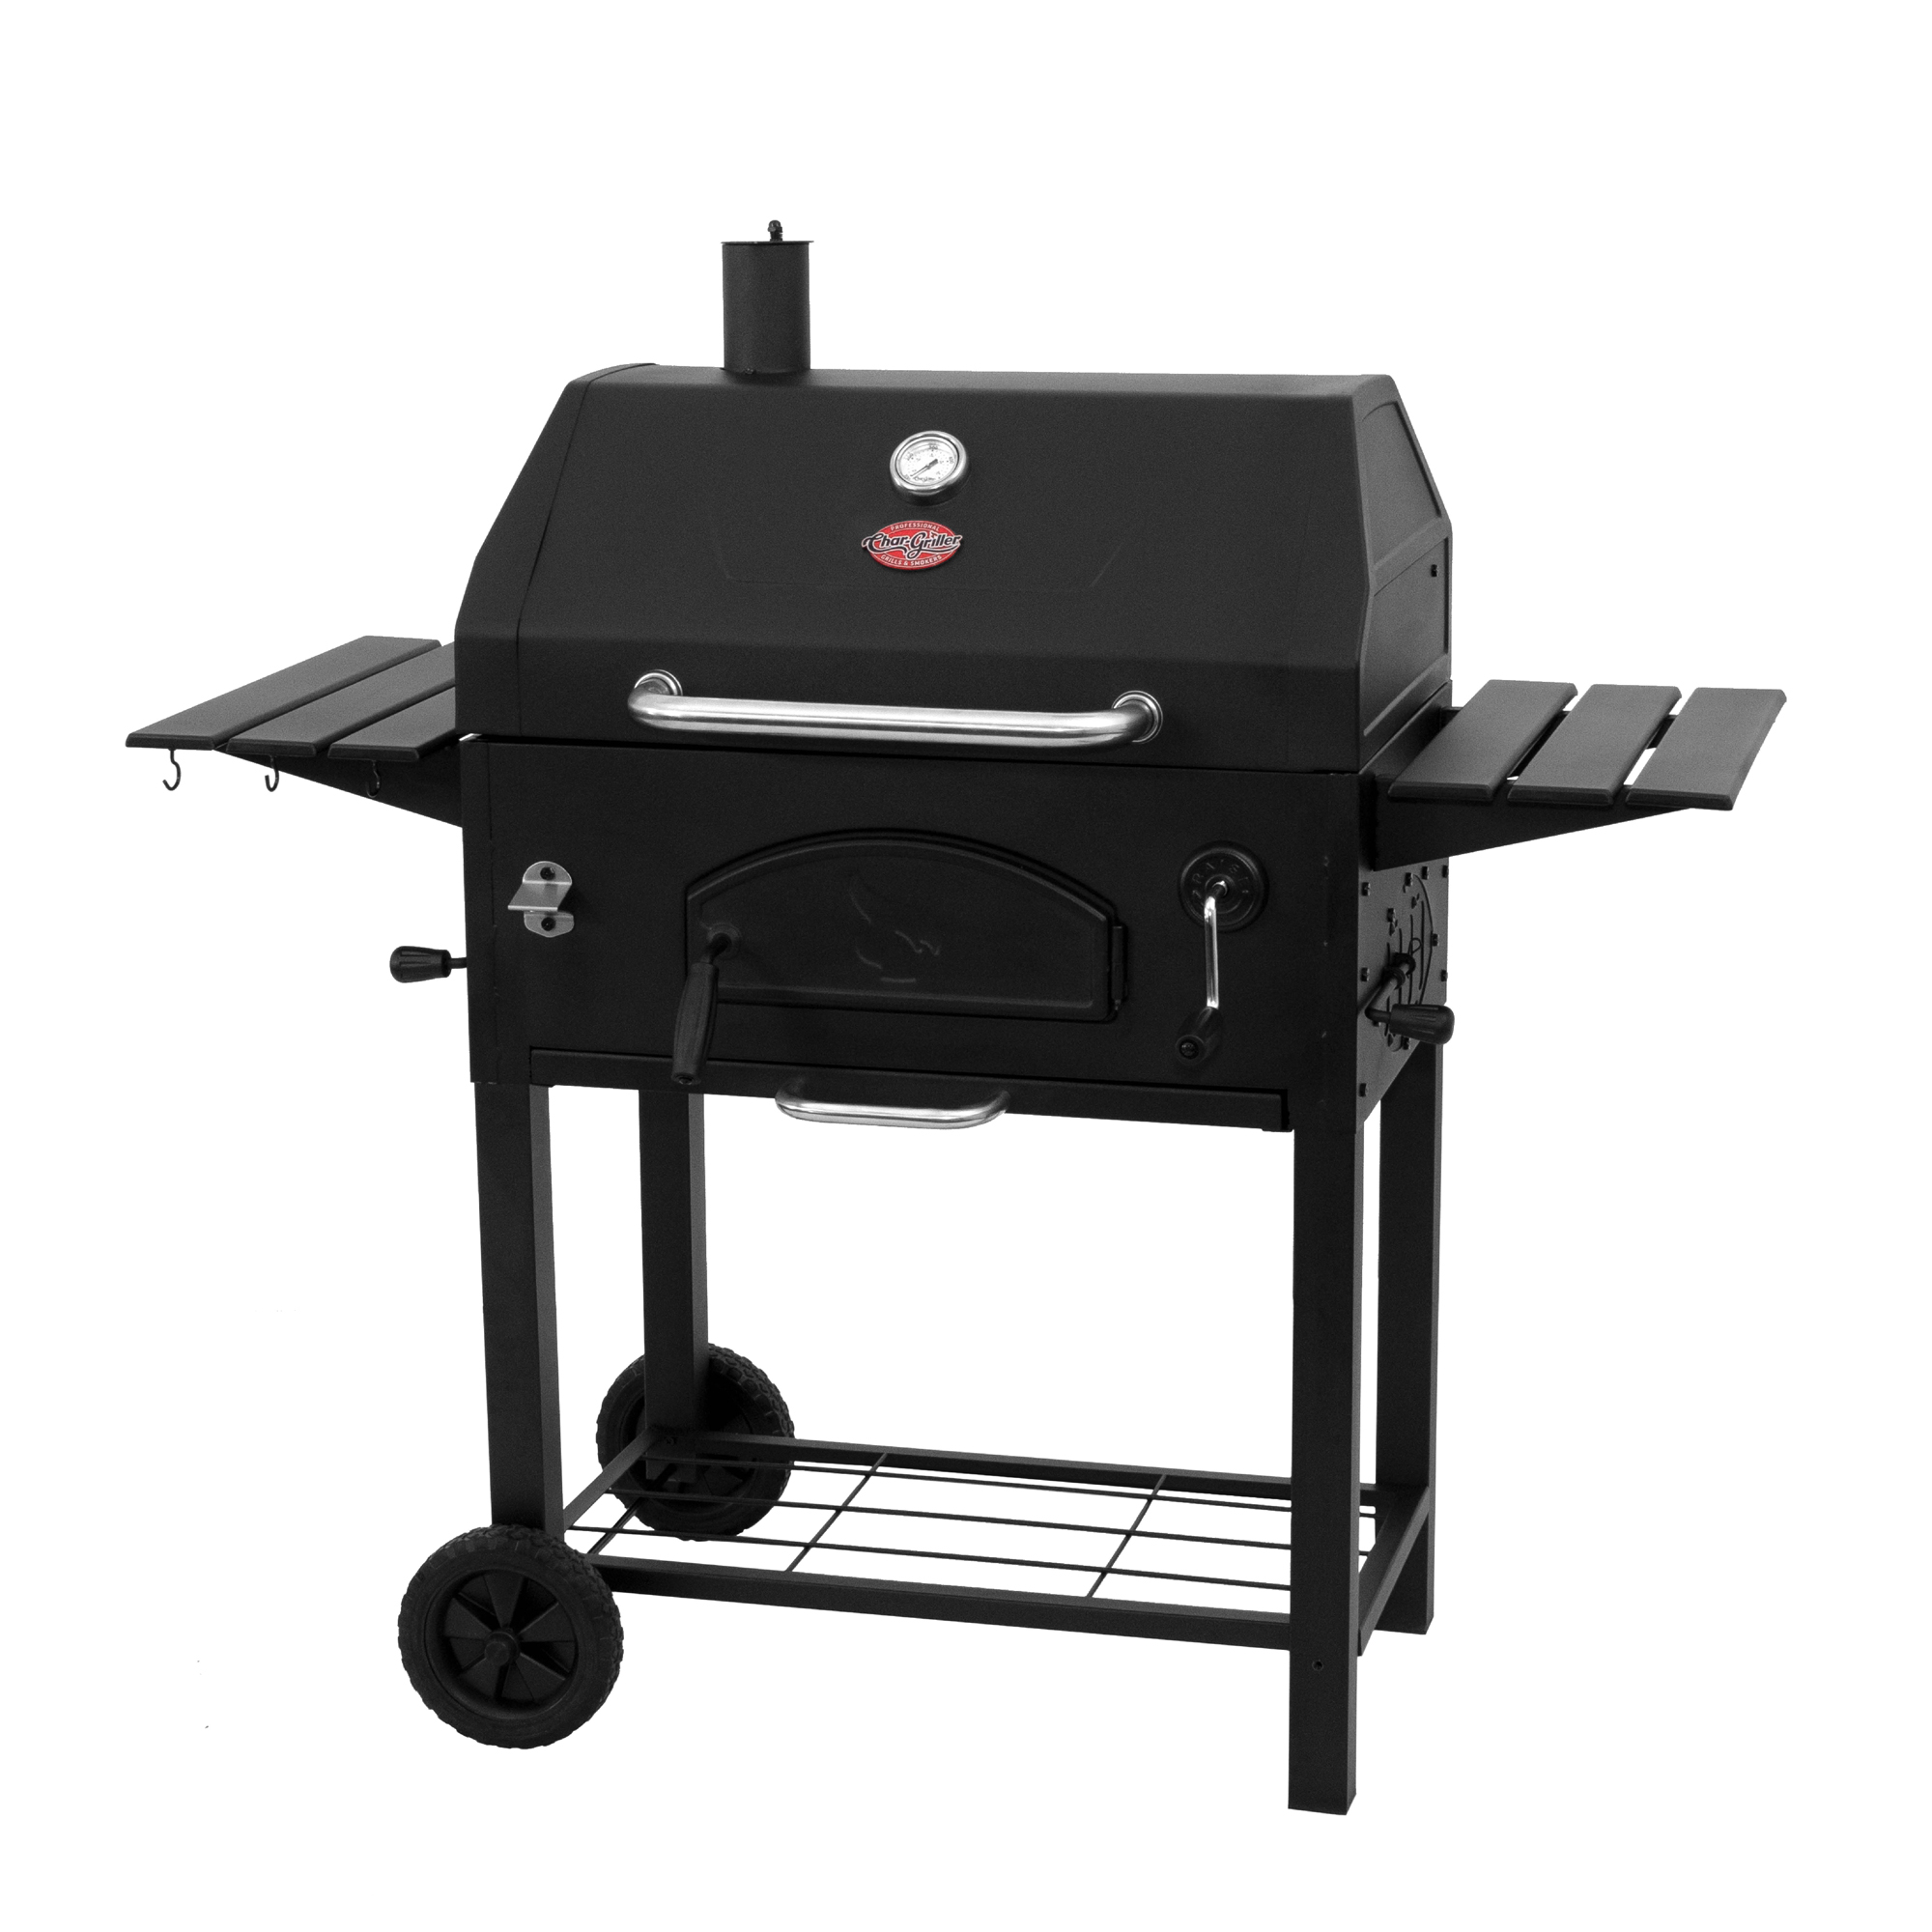 Char-Griller Traditional Charcoal Grill, Black - image 3 of 15